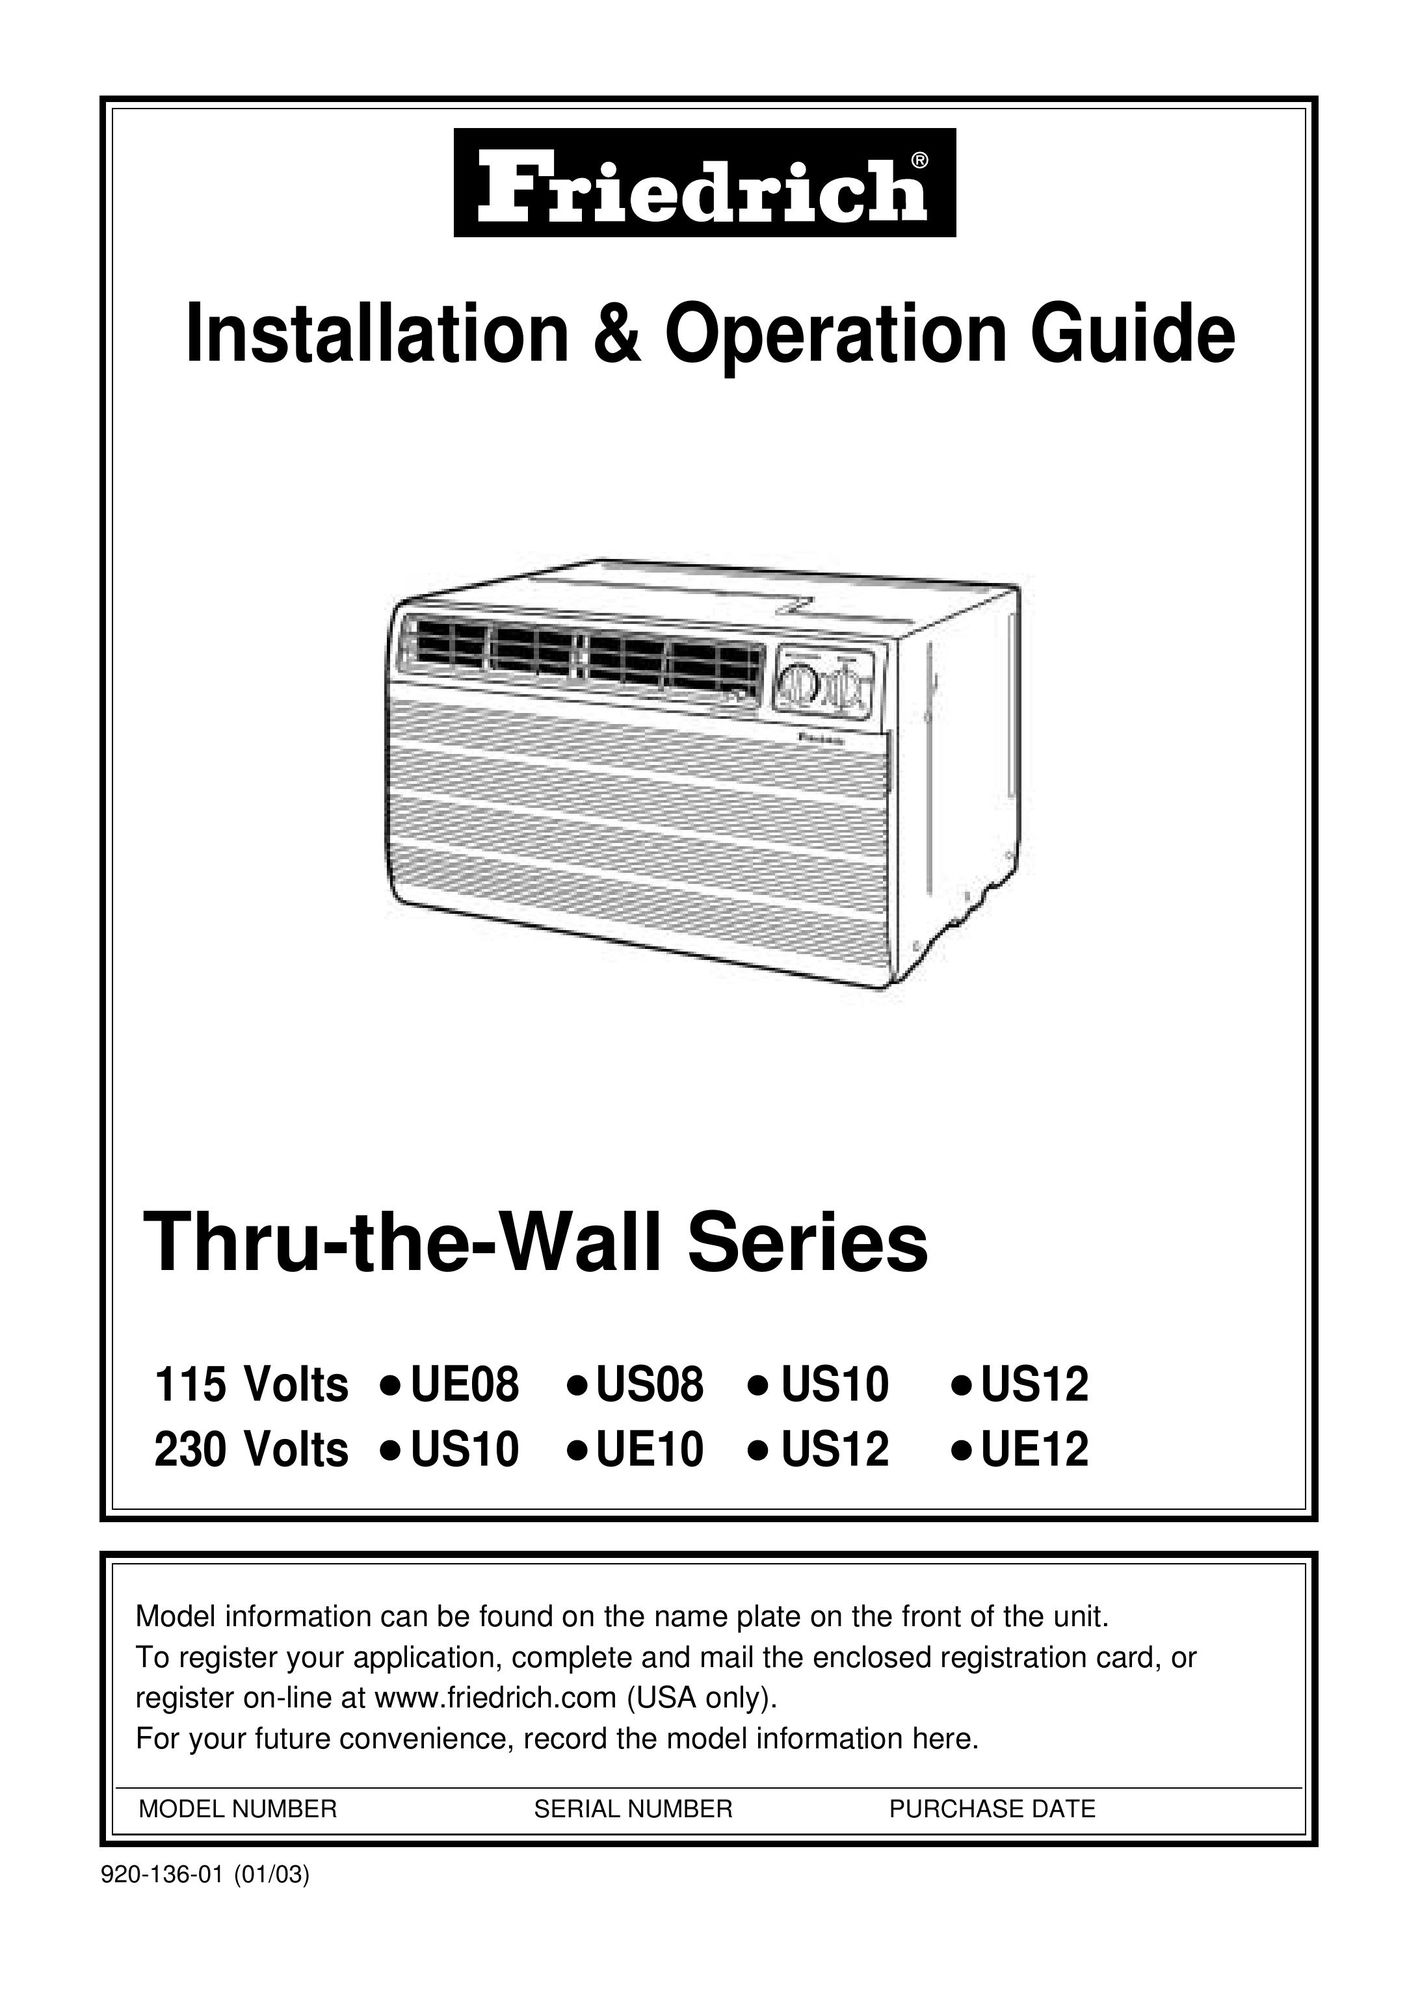 Friedrich 230 Volts US10 Air Conditioner User Manual